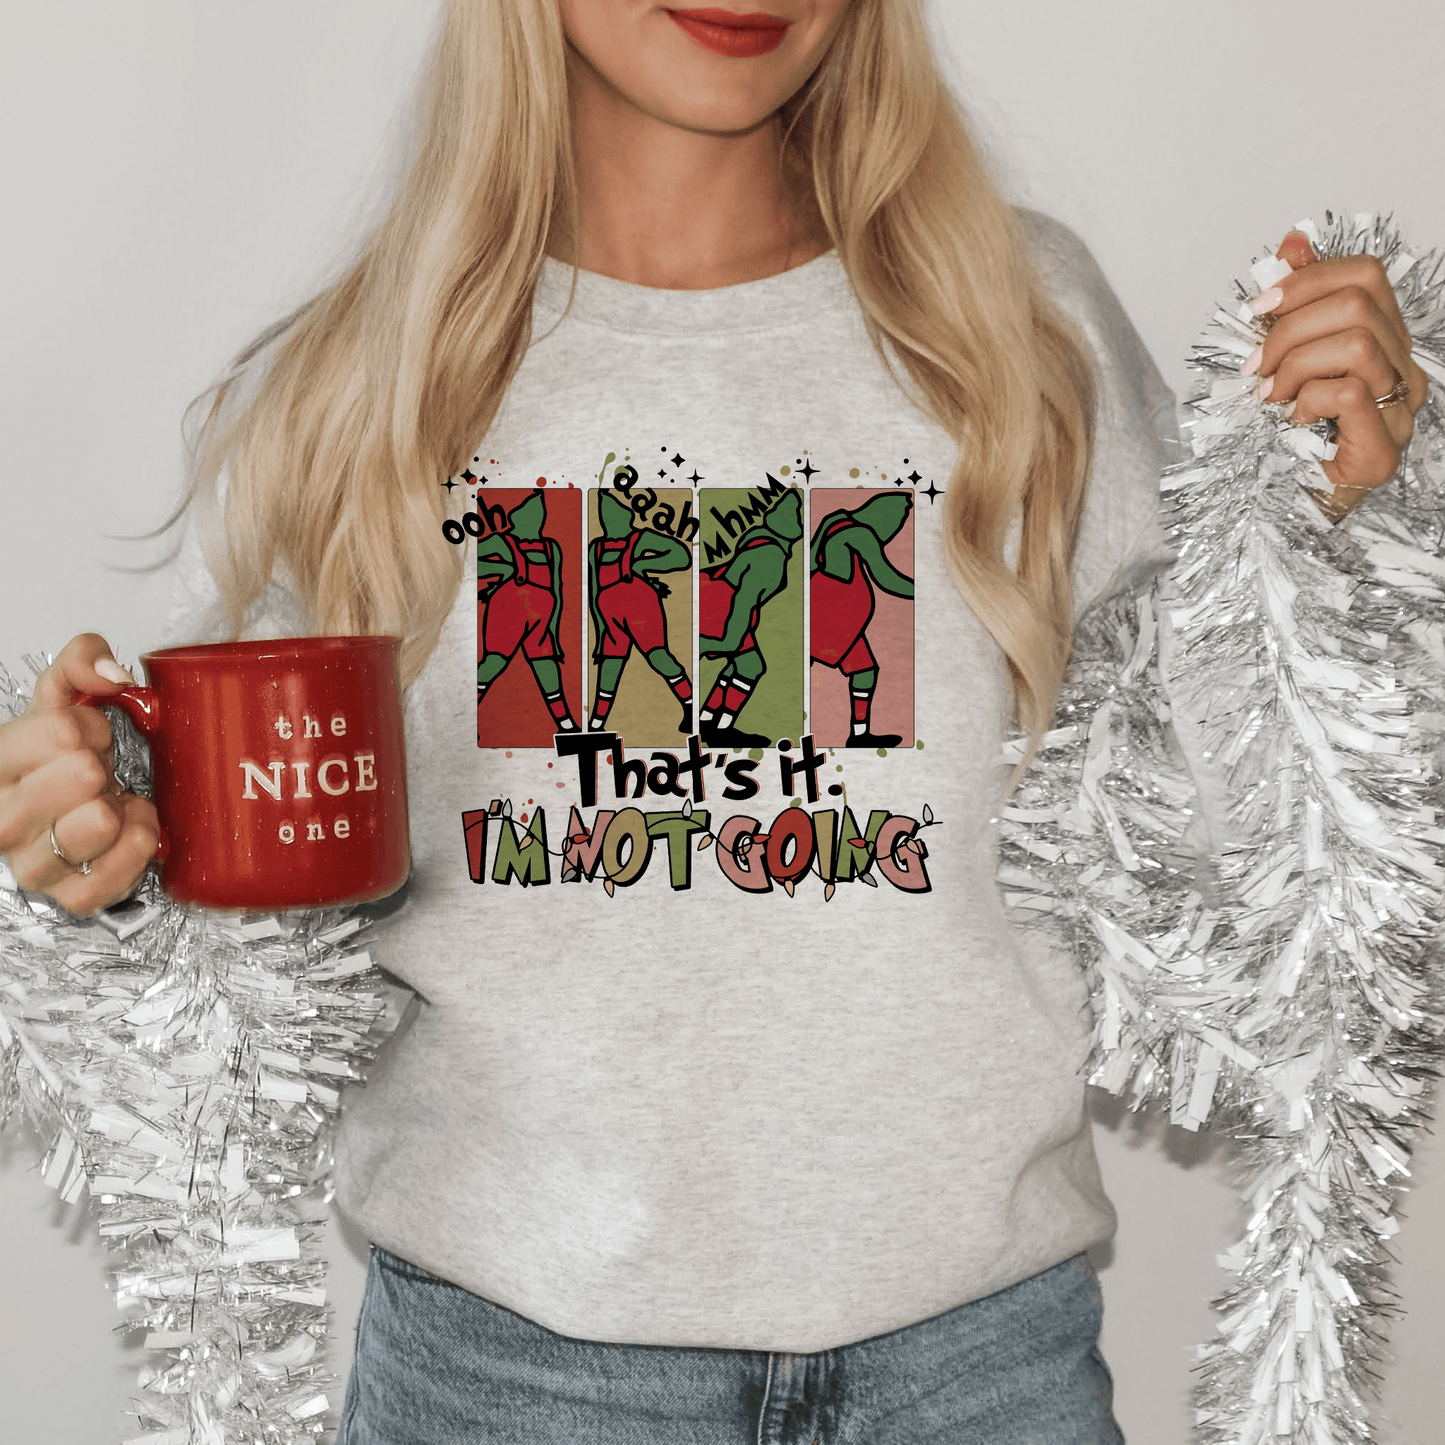 Festive Grinch-Inspired 'That's it, I'm Not Going' Holiday Sweatshirt